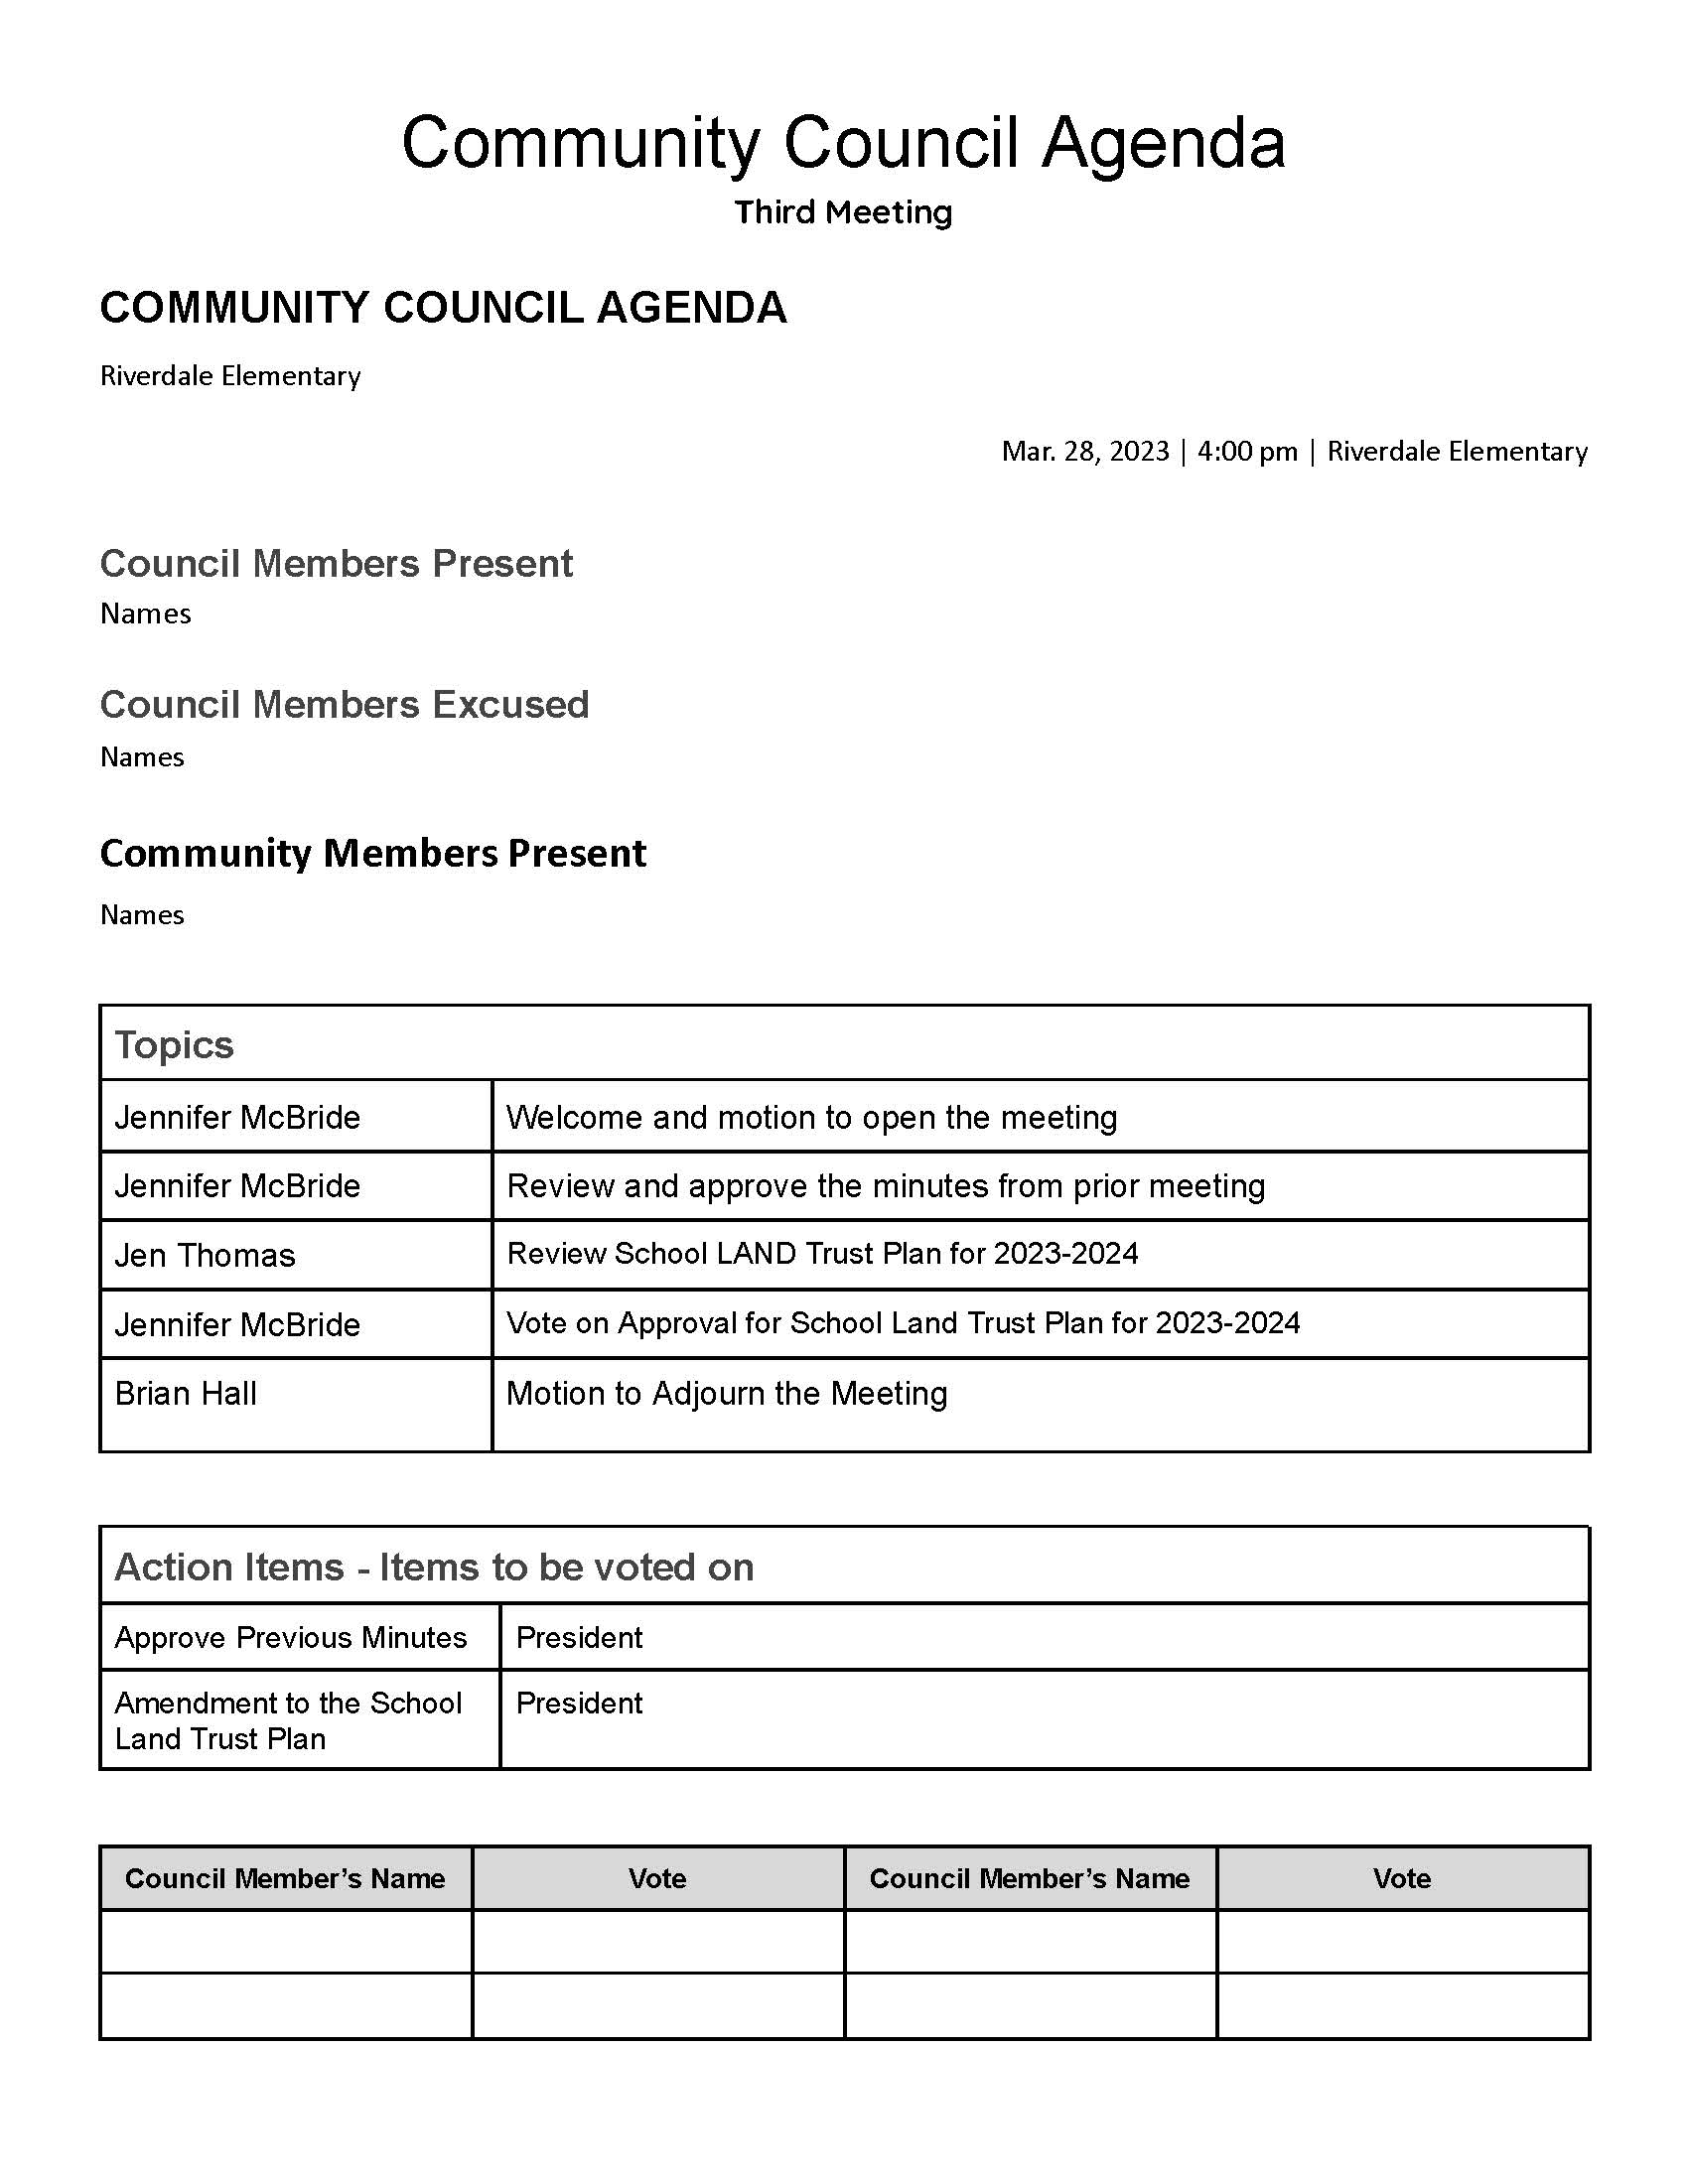 March Riverdale Elementary Community Council Agenda 3 21 23 1 Page 1